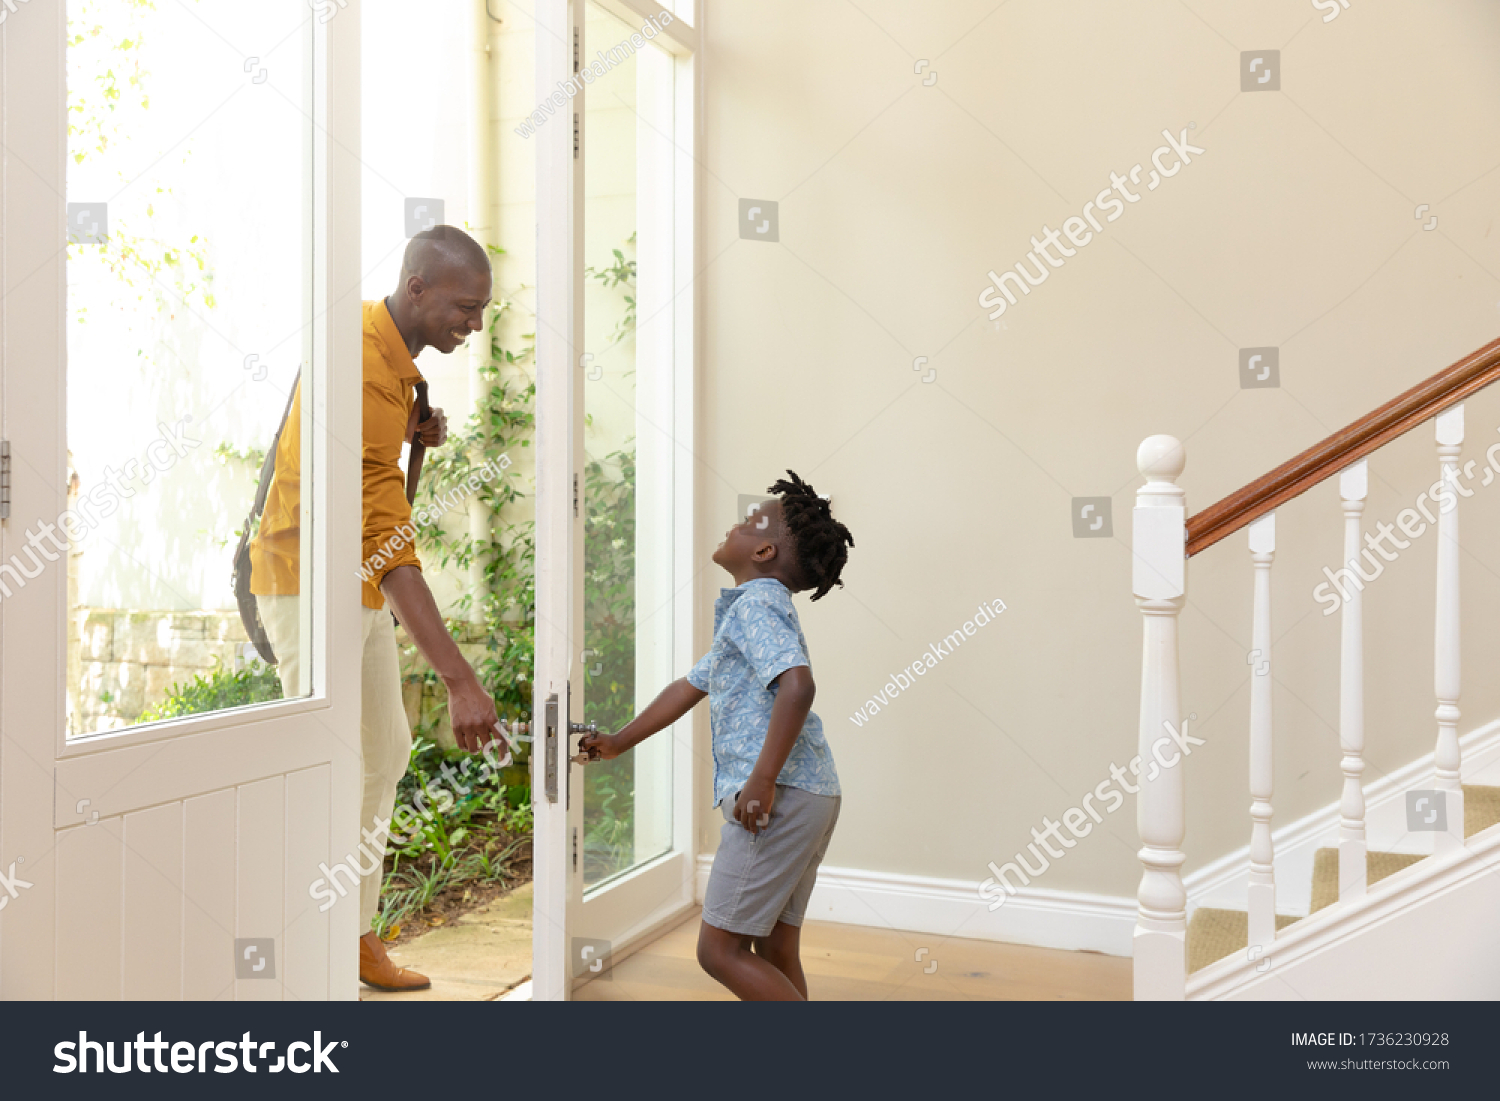 Side view of an African American man arriving home, welcomed by his young son opening the front door. Social distancing and self isolation in quarantine lockdown for Coronavirus Covid19 #1736230928